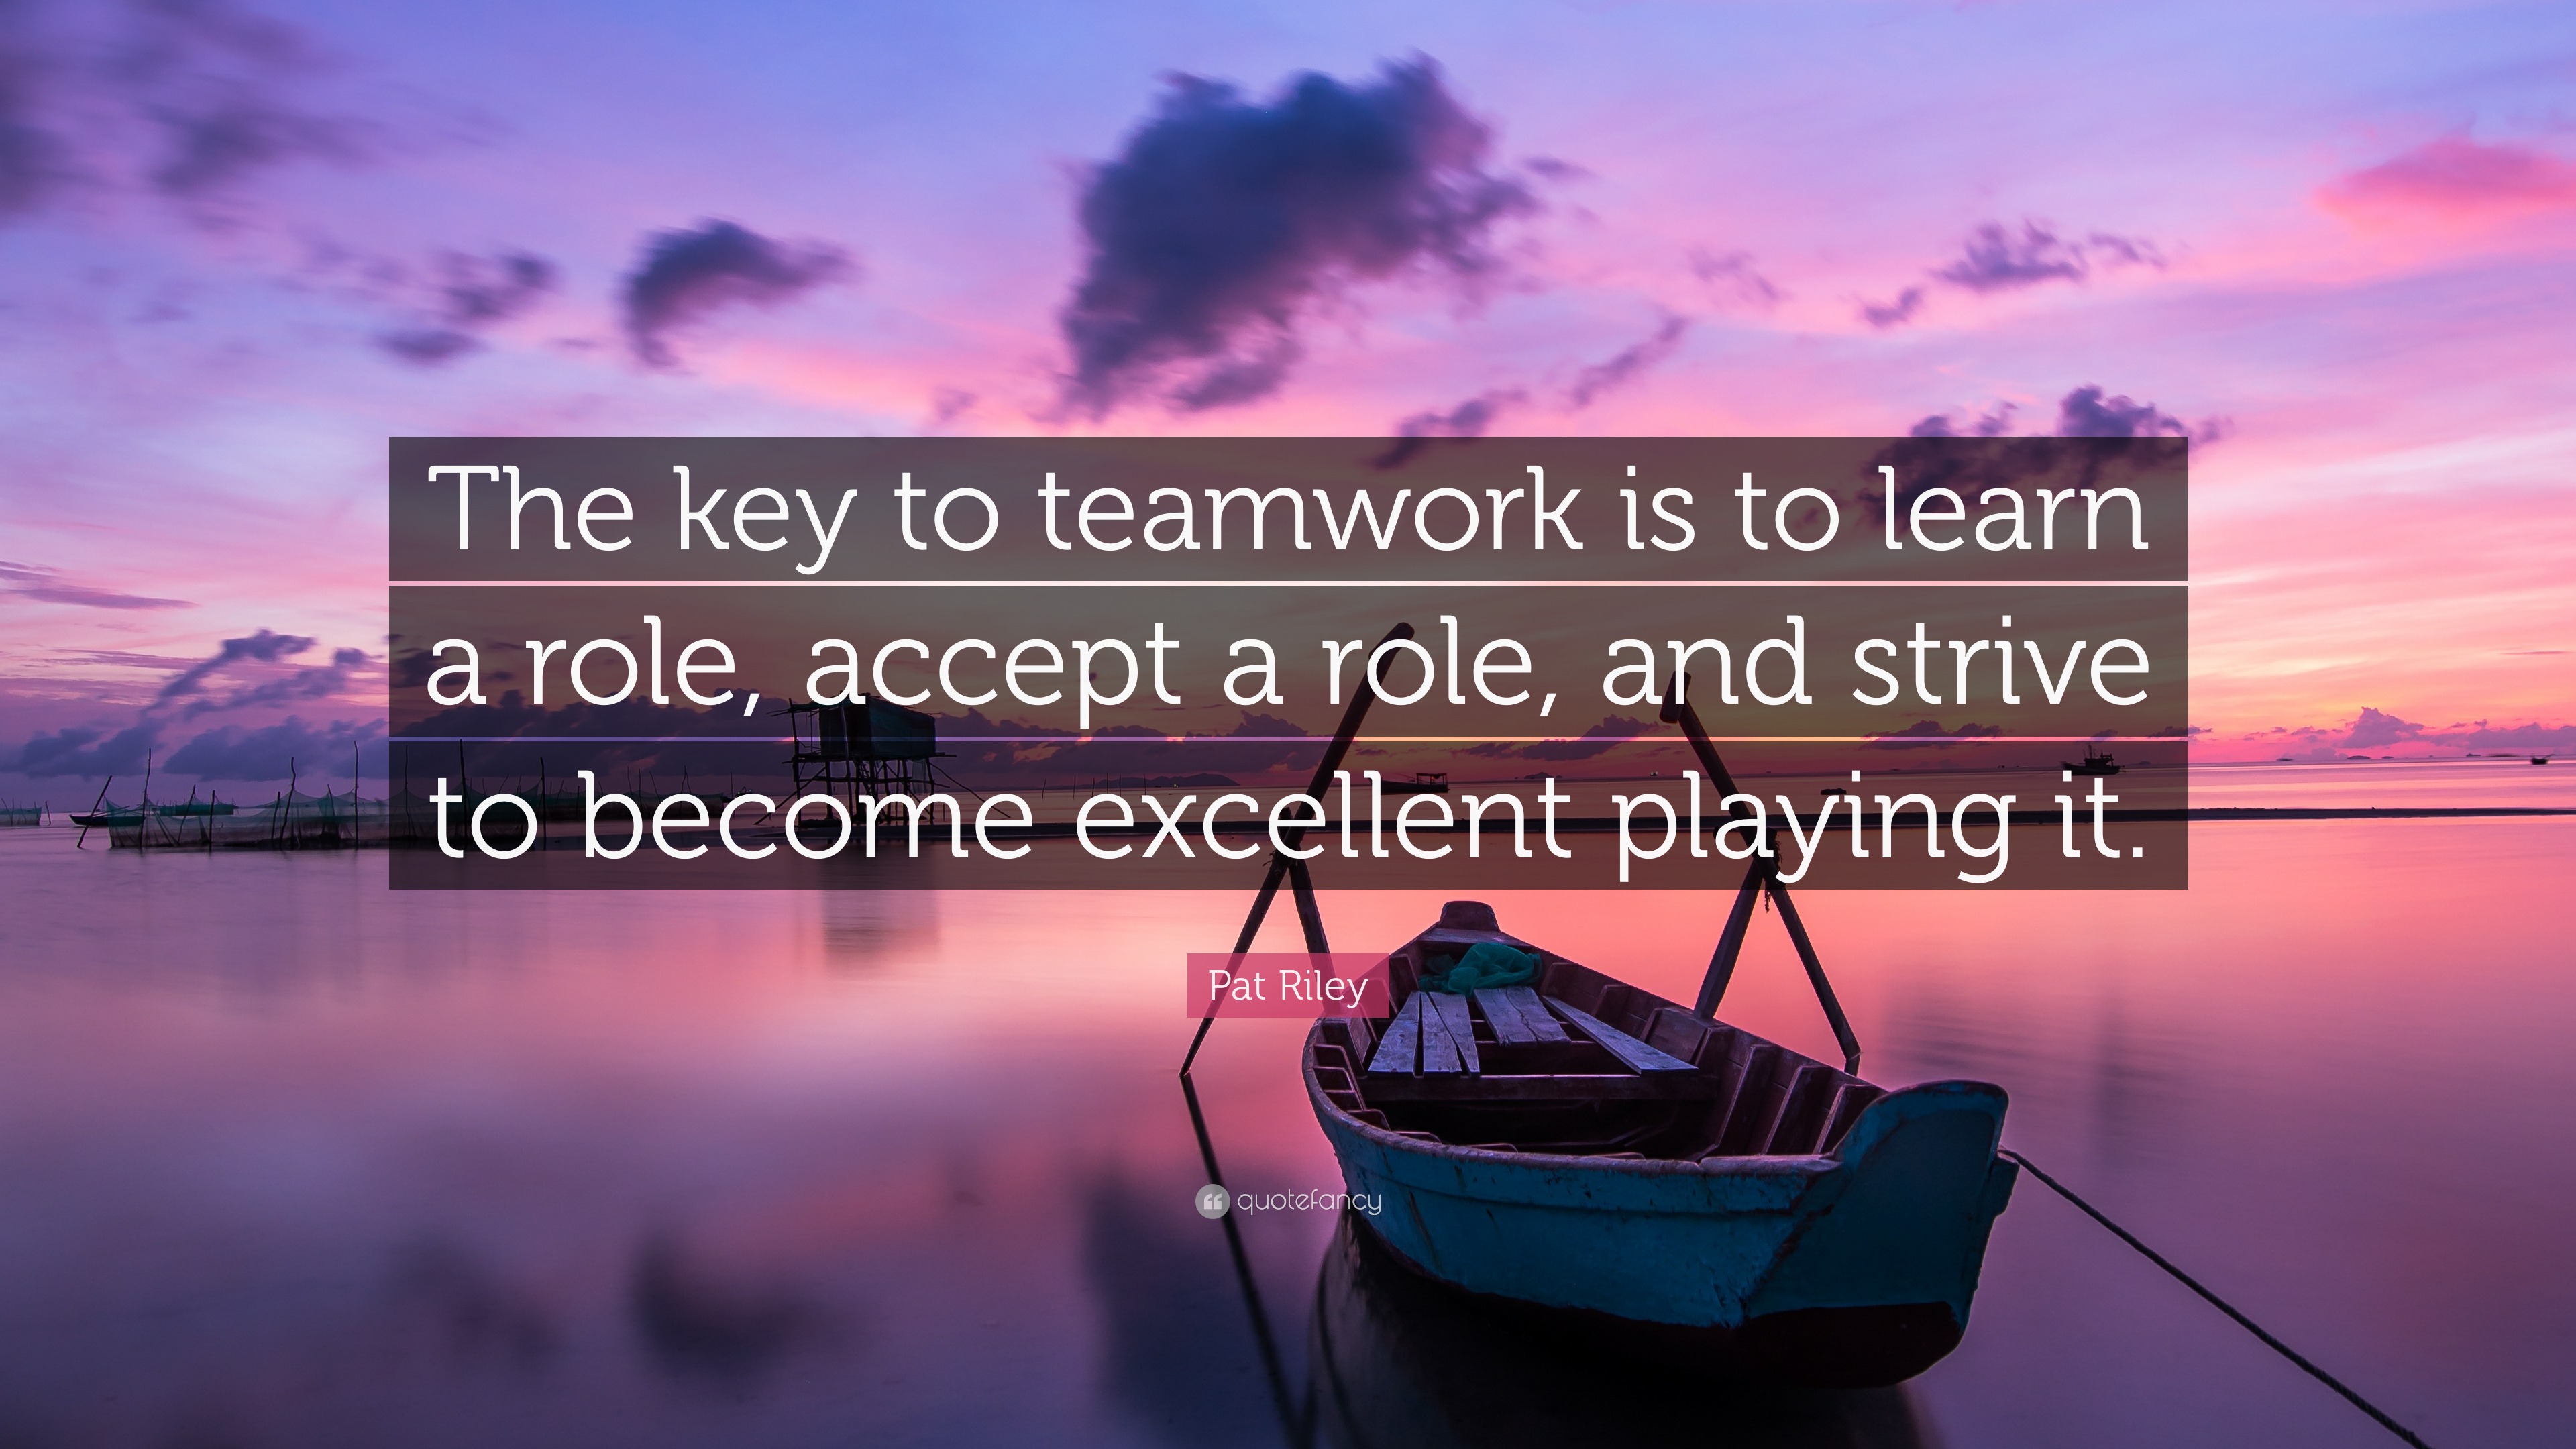 Pat Riley Quote: “The key to teamwork is to learn a role, accept a role